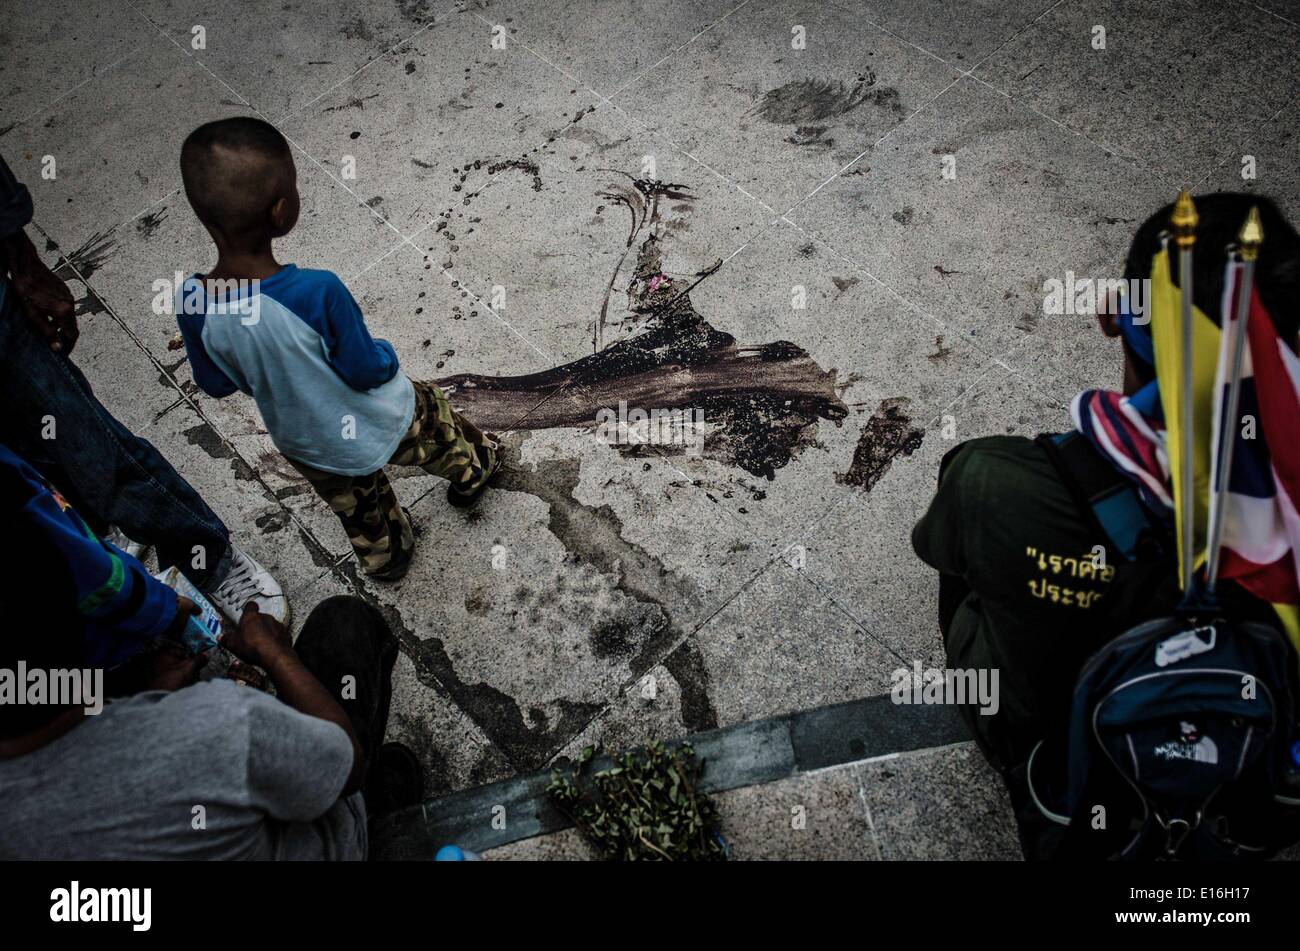 Bangkok, Thailand. 22nd Apr, 2014. A young boy looks over the blood covered spot where 3 people were shot dead and a hand grenade exploded in Bangkok. Thailand's army chief announced in a televised address to the nation on May 22 that the armed forces were seizing power after months of deadly political turmoil. The commander-in-chief, who invoked martial law on Tuesday, said the coup was needed to prevent the conflict escalating. © George Nickels/NurPhoto/ZUMAPRESS.com/Alamy Live News Stock Photo